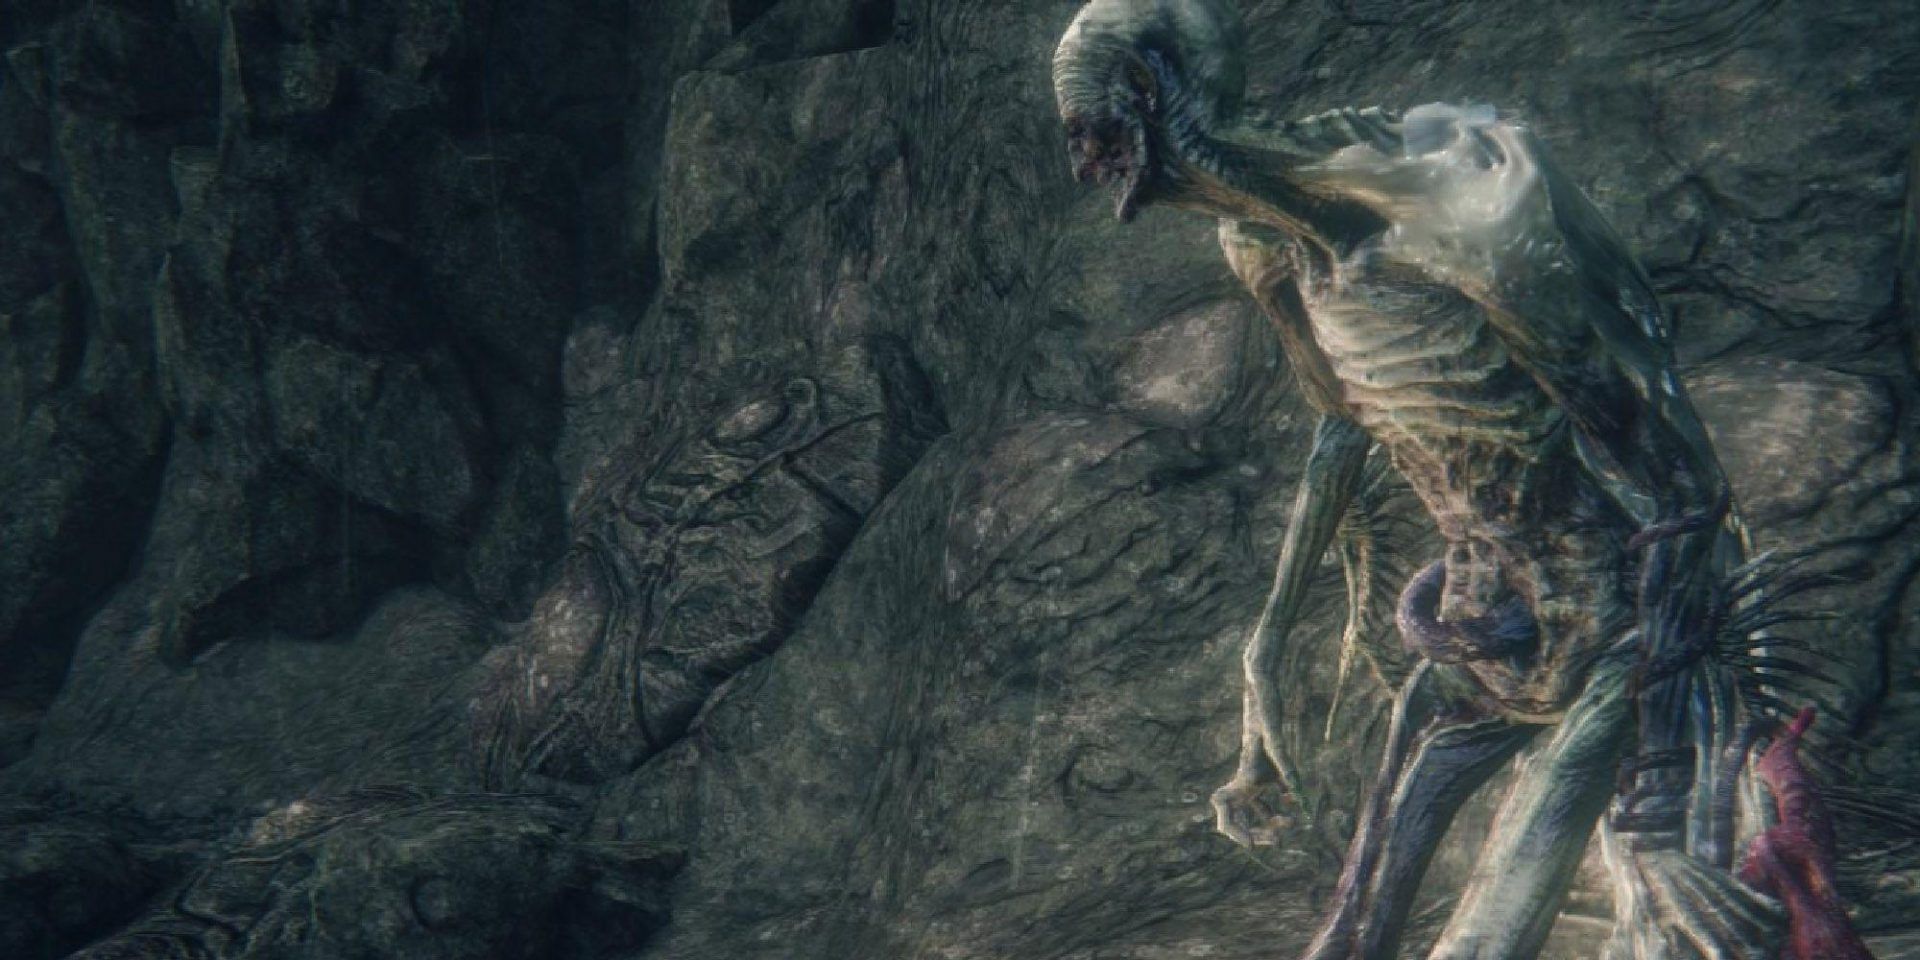 Bloodborne The Old Hunters DLC final boss, Orphan of Kos, emerging to face the player.